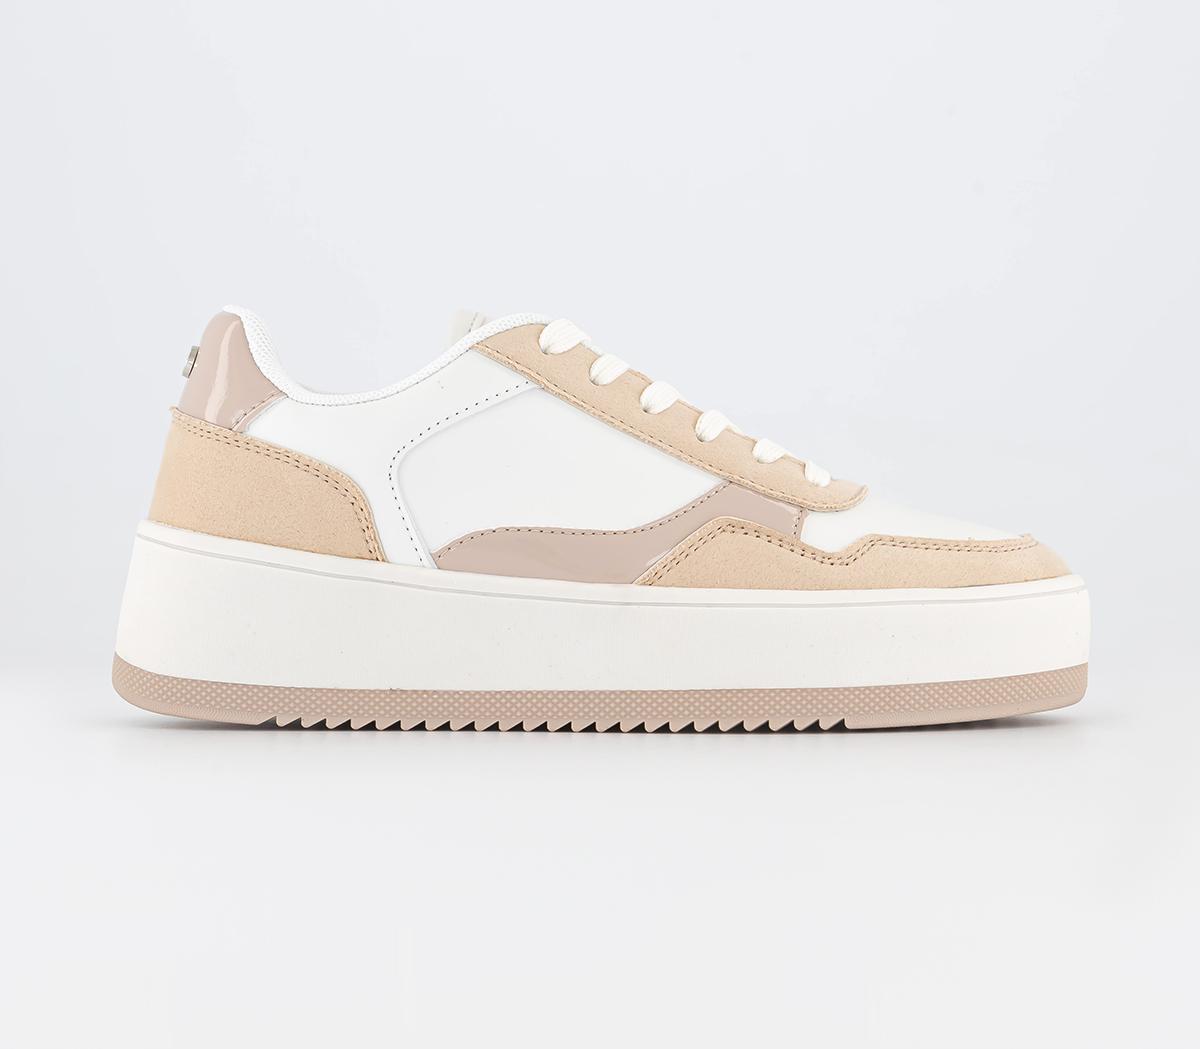 OFFICE Floella Block Detail Trainers White Beige Mix - Fashion Trainers